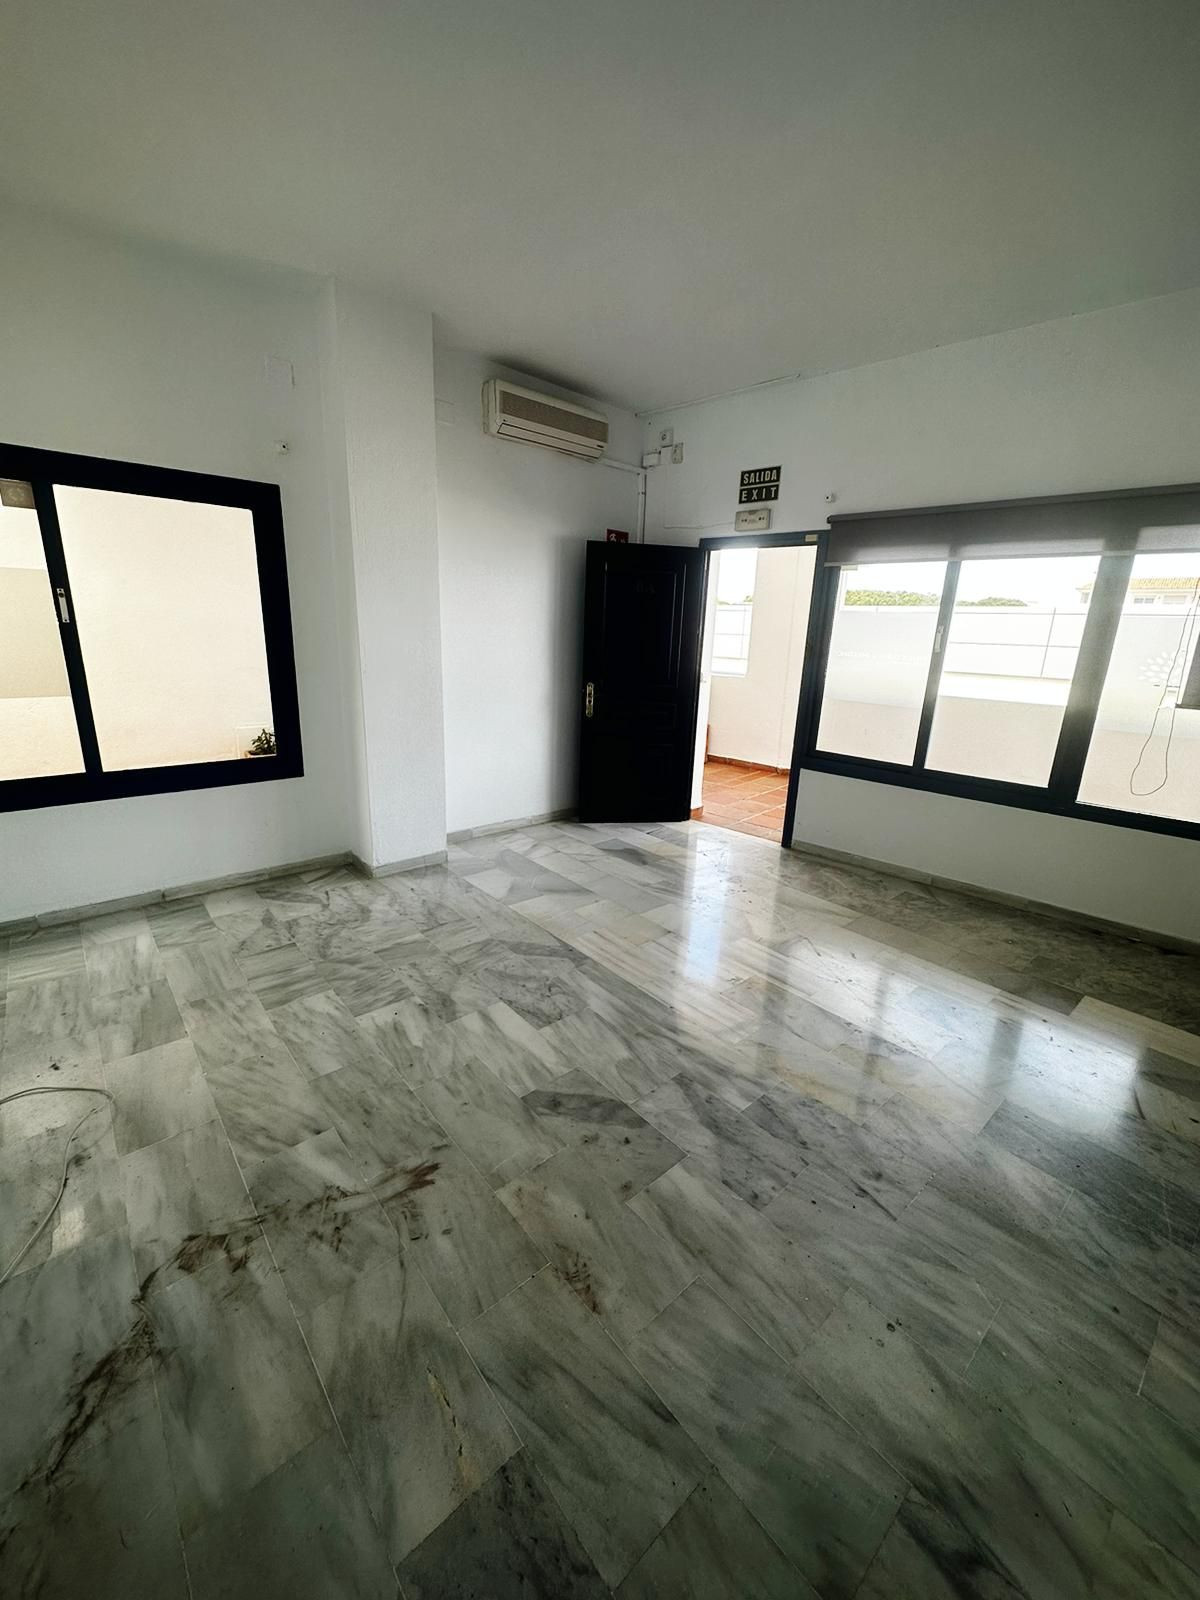 						Commercial  Commercial Premises
																					for rent
																			 in Calahonda
					